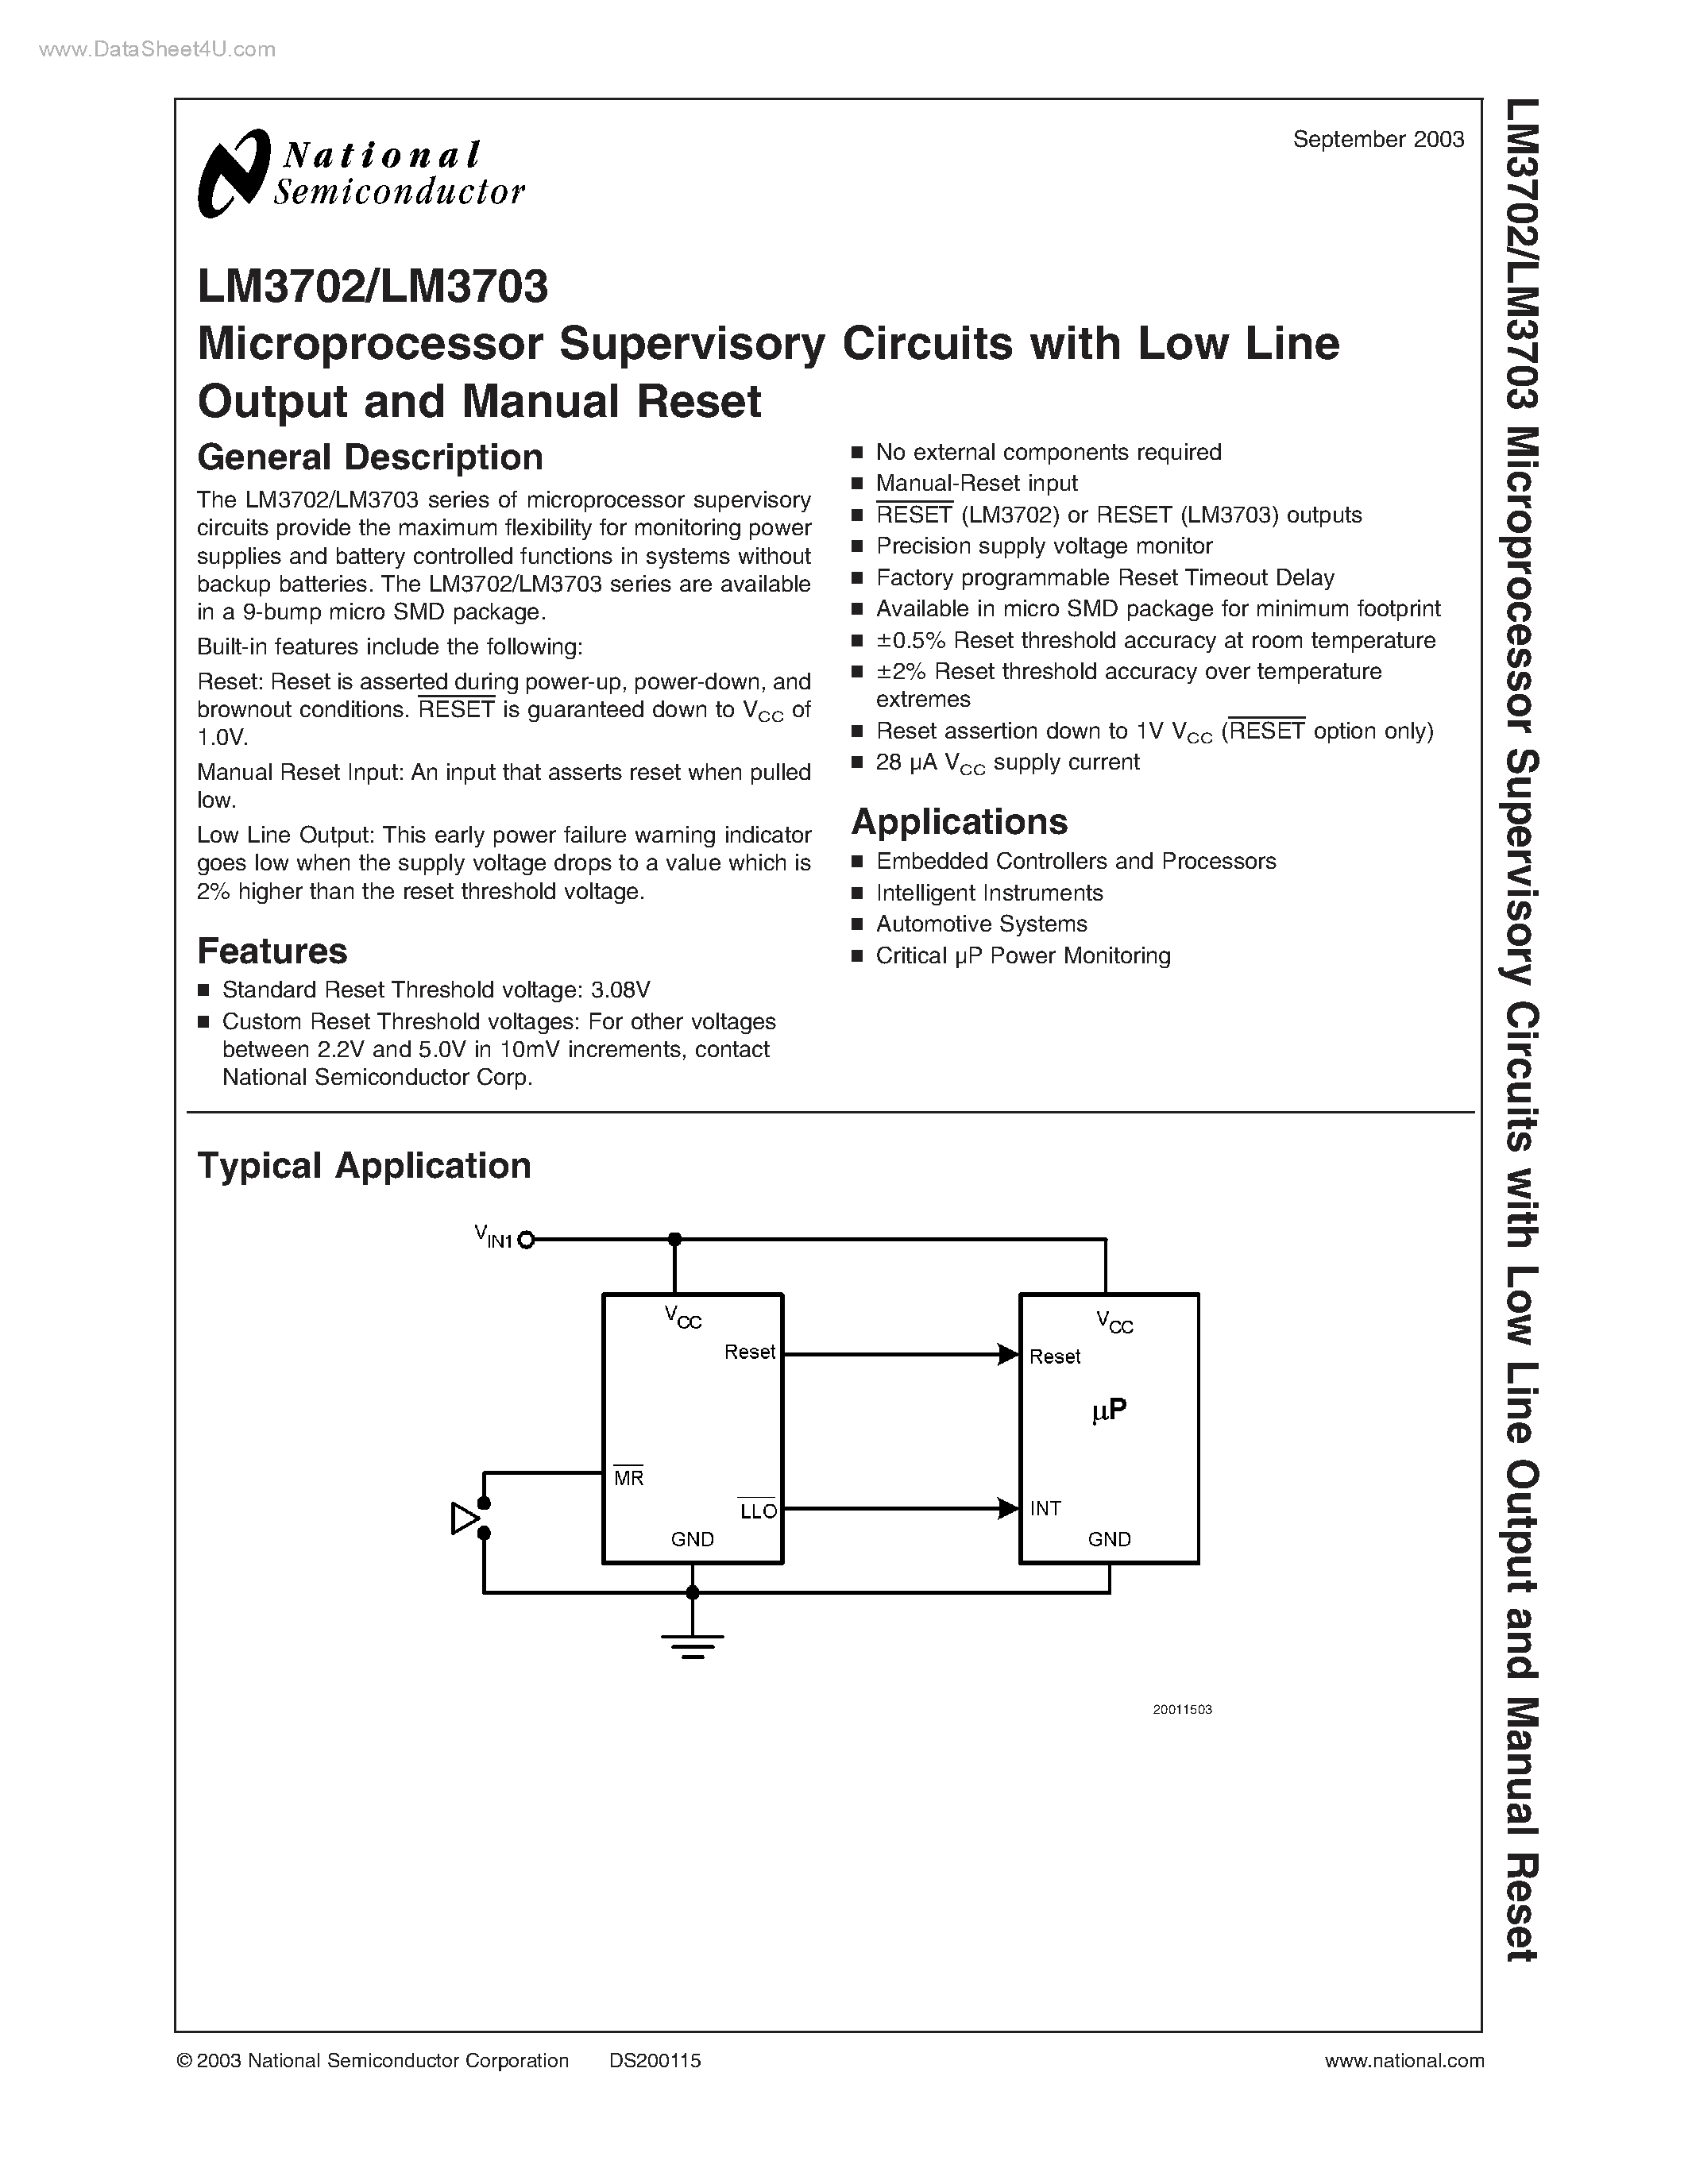 Datasheet LM3702 - (LM3702 / LM3703) Microprocessor Supervisory Circuits page 1